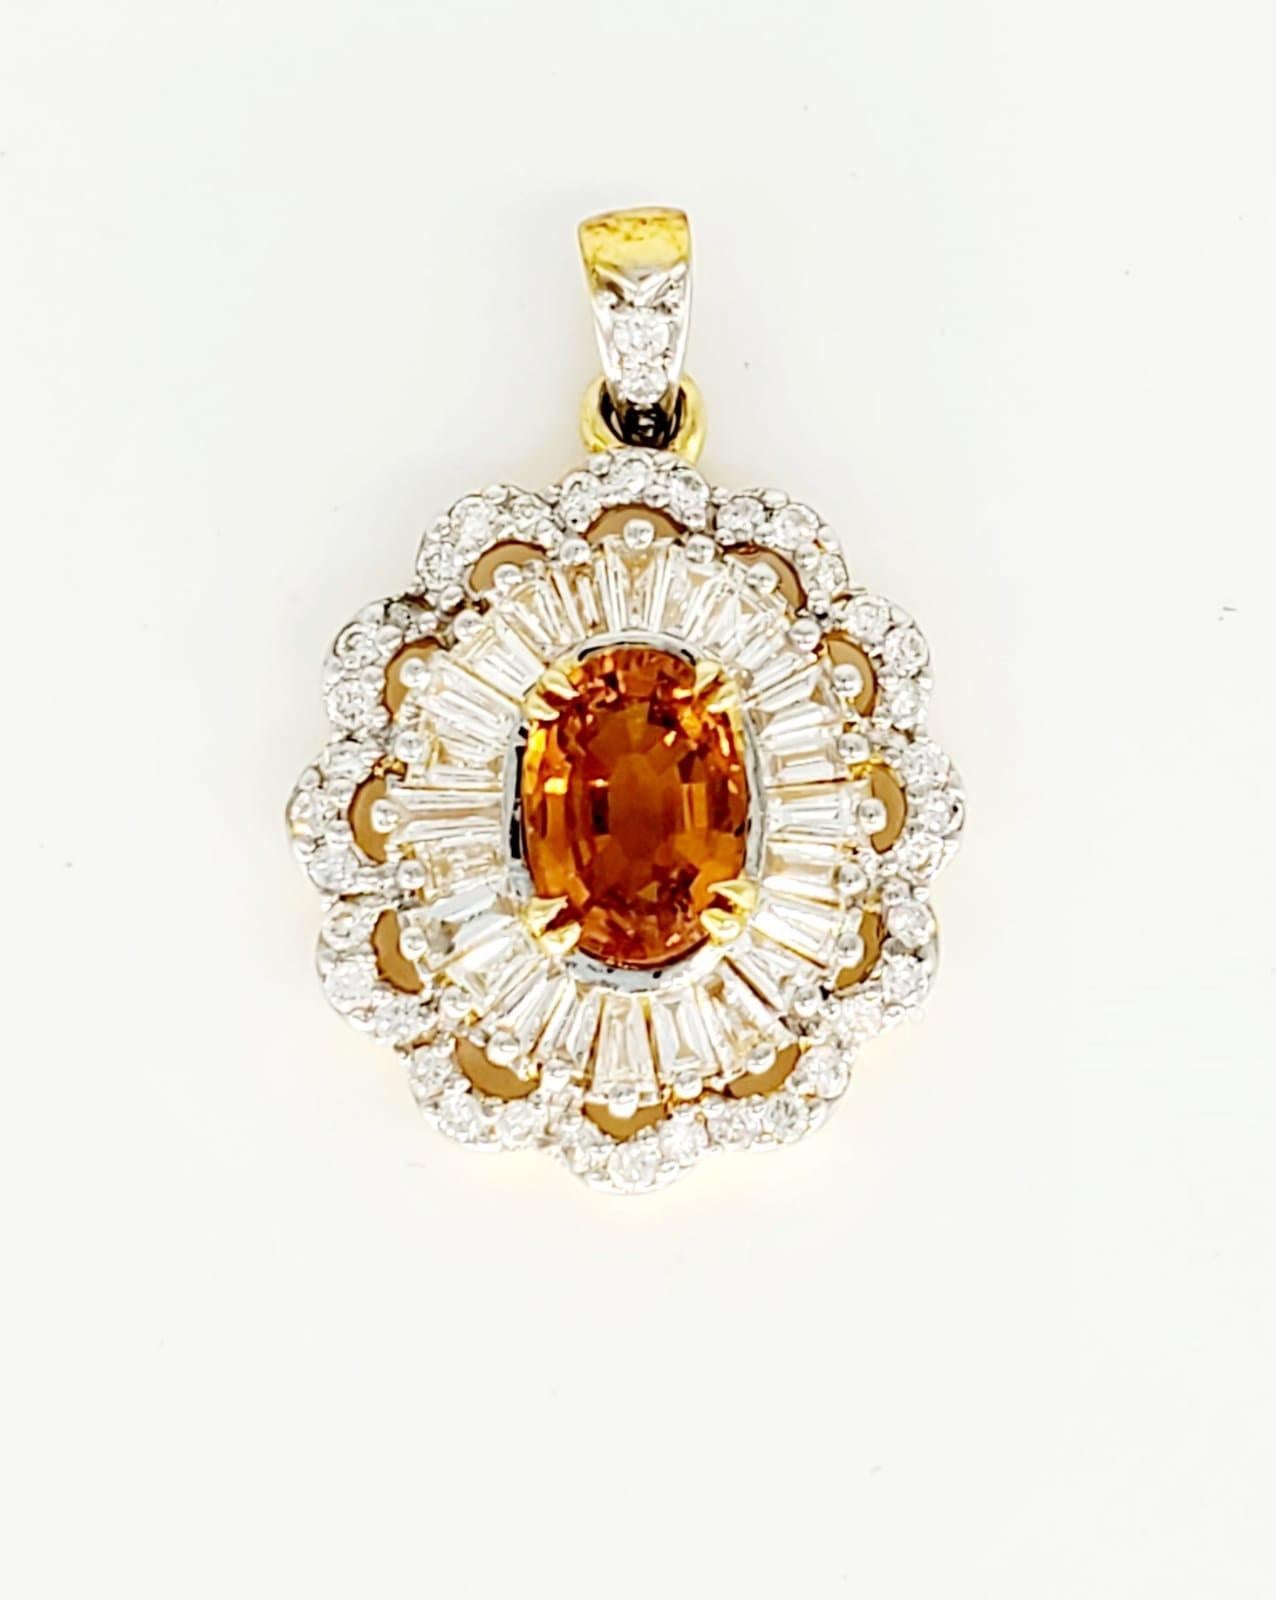 Vintage 5.41 Carat Certified Natural Sapphire and Diamonds Cluster Pendant 18k. The pendant measures 30mm X 18mm and features a total of approx 3.85 carat of diamonds. The tapered baguette surrounding the natural yellow sapphire are invisible set